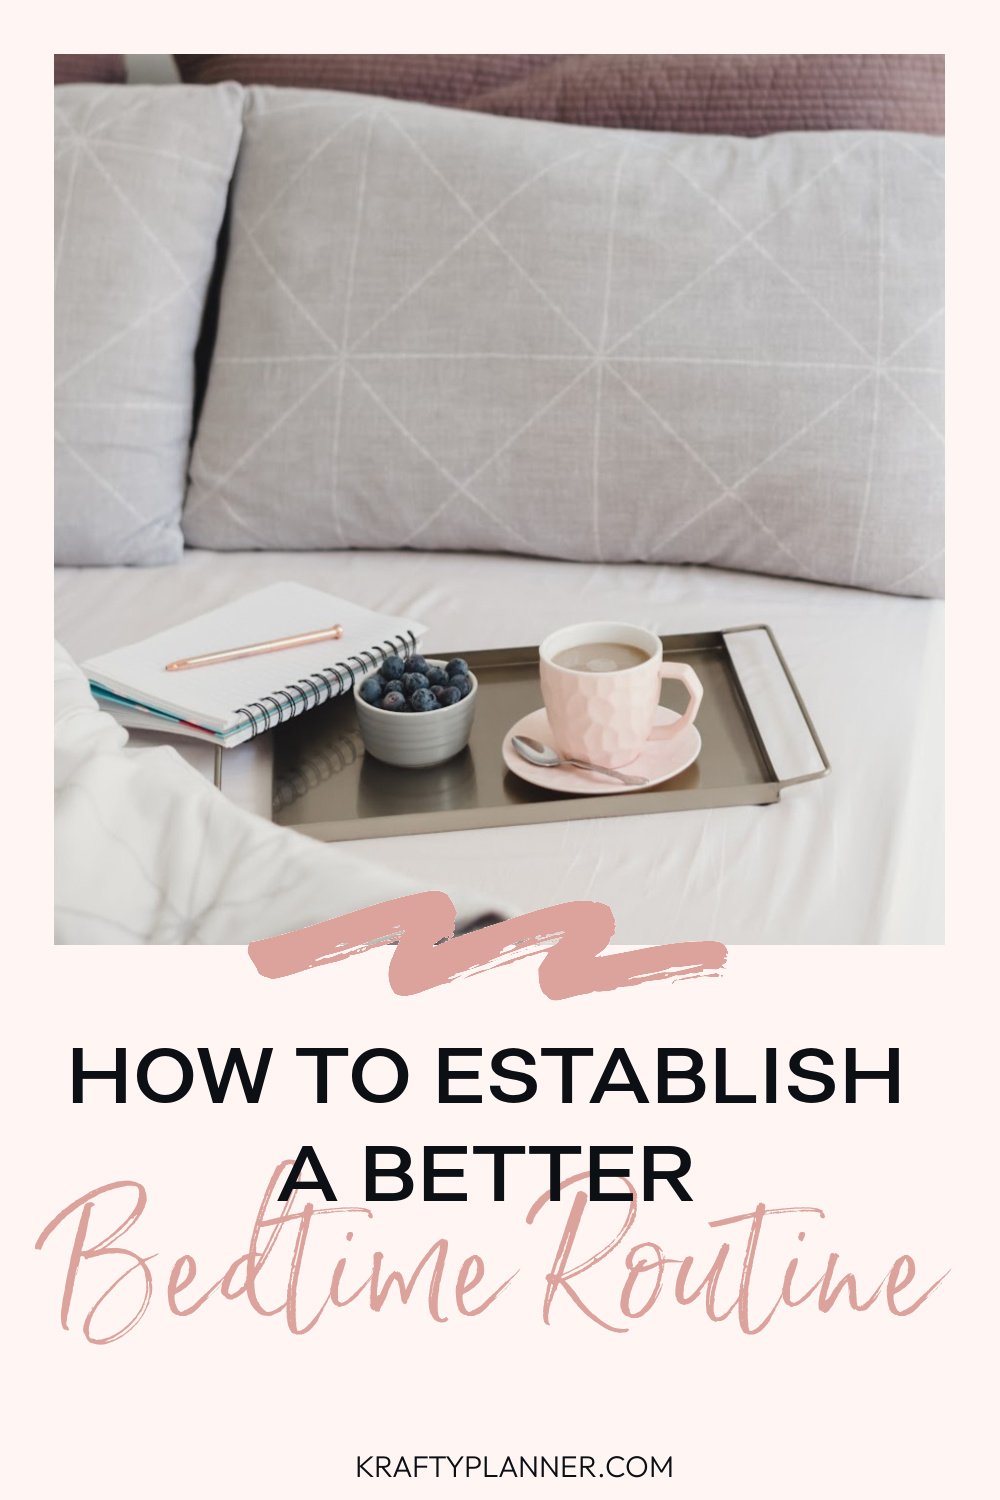 How To Establish A Better Bedtime Routine